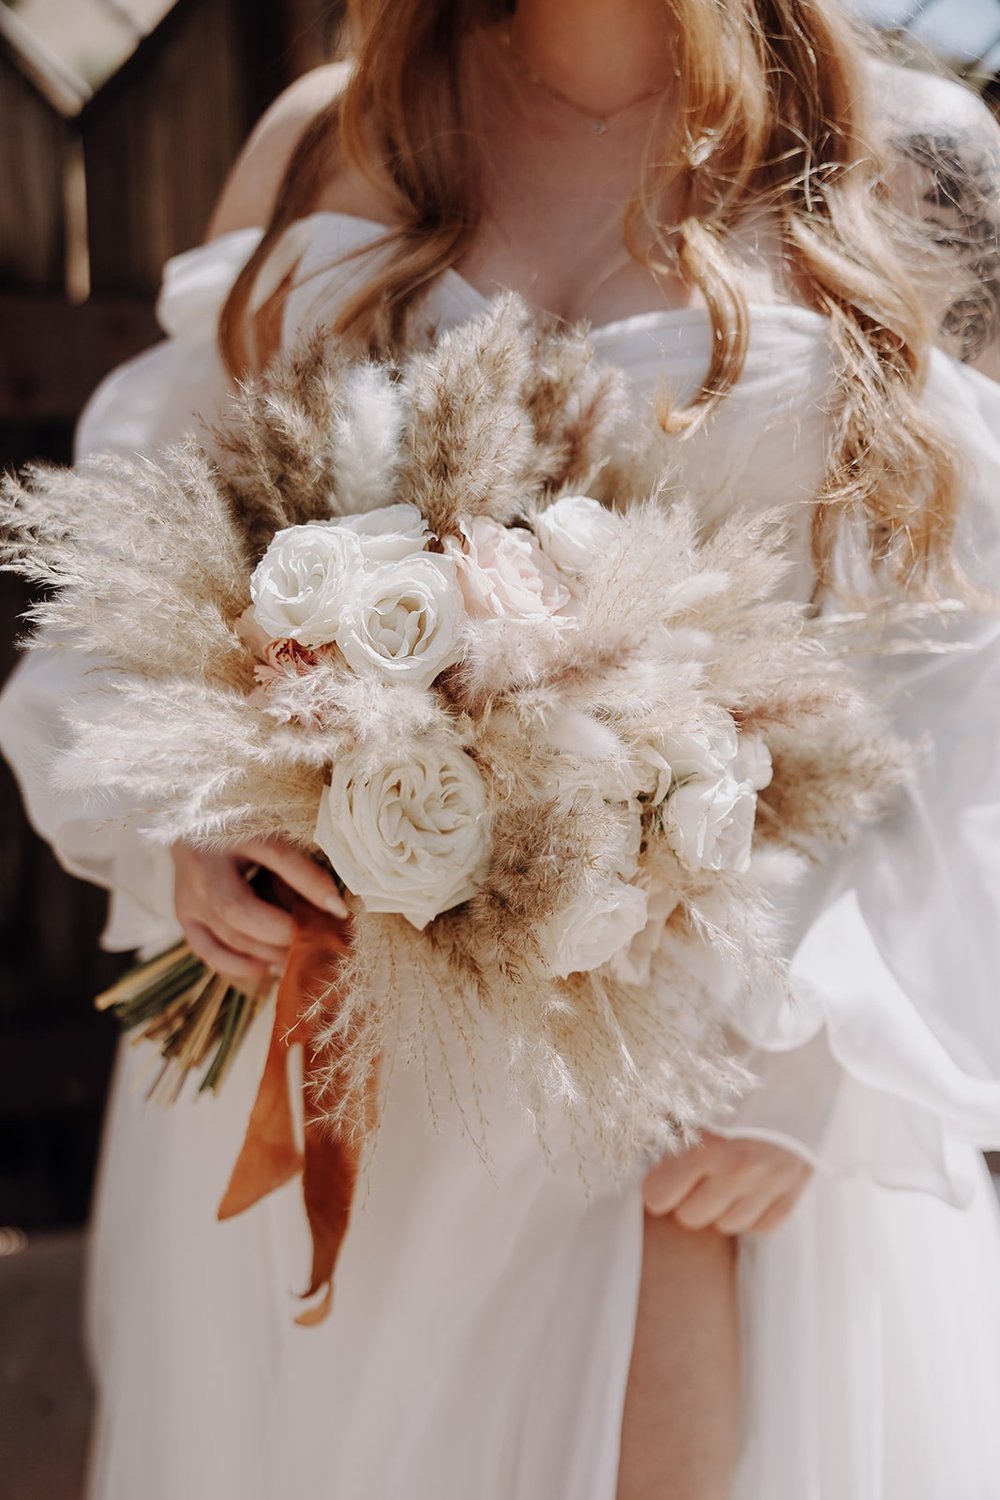 Bride holding all white flower bouquet at Joshua Tree wedding in California